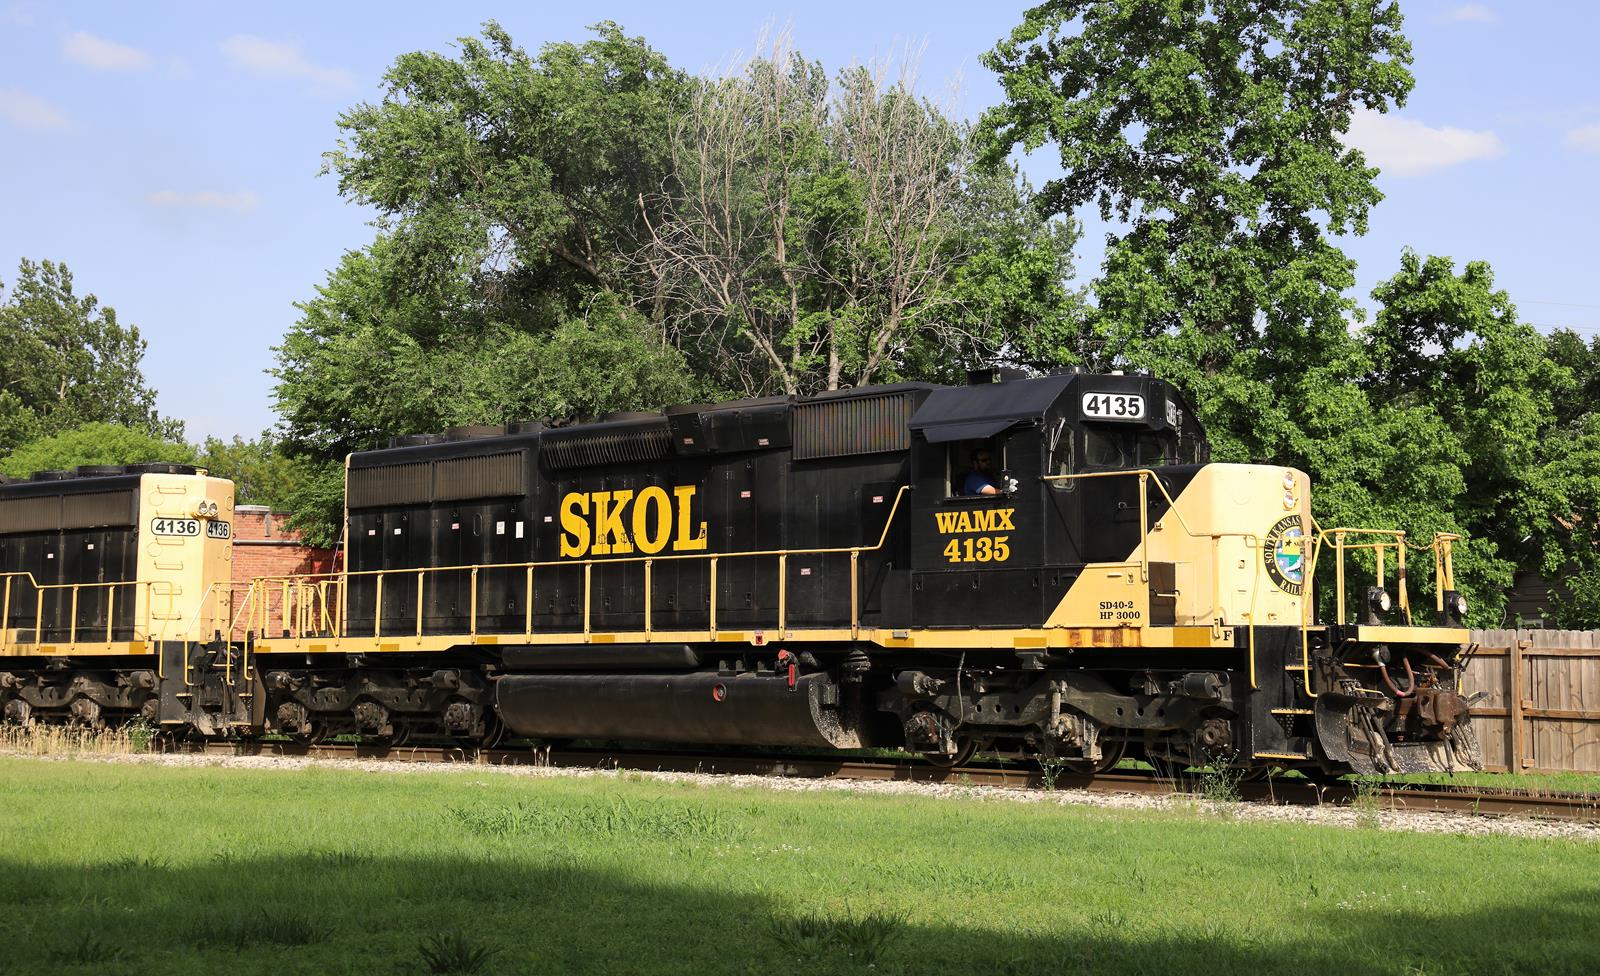 WAMX 4135 is a class EMD SD40-2 and  is pictured in Wichita, Kansas, USA.  This was taken along the K&O Mainline on the South Kansas and Oklahoma Railroad. Photo Copyright: Marc Lingenfelter uploaded to Railroad Gallery on 12/08/2022. This photograph of WAMX 4135 was taken on Tuesday, June 14, 2022. All Rights Reserved. 